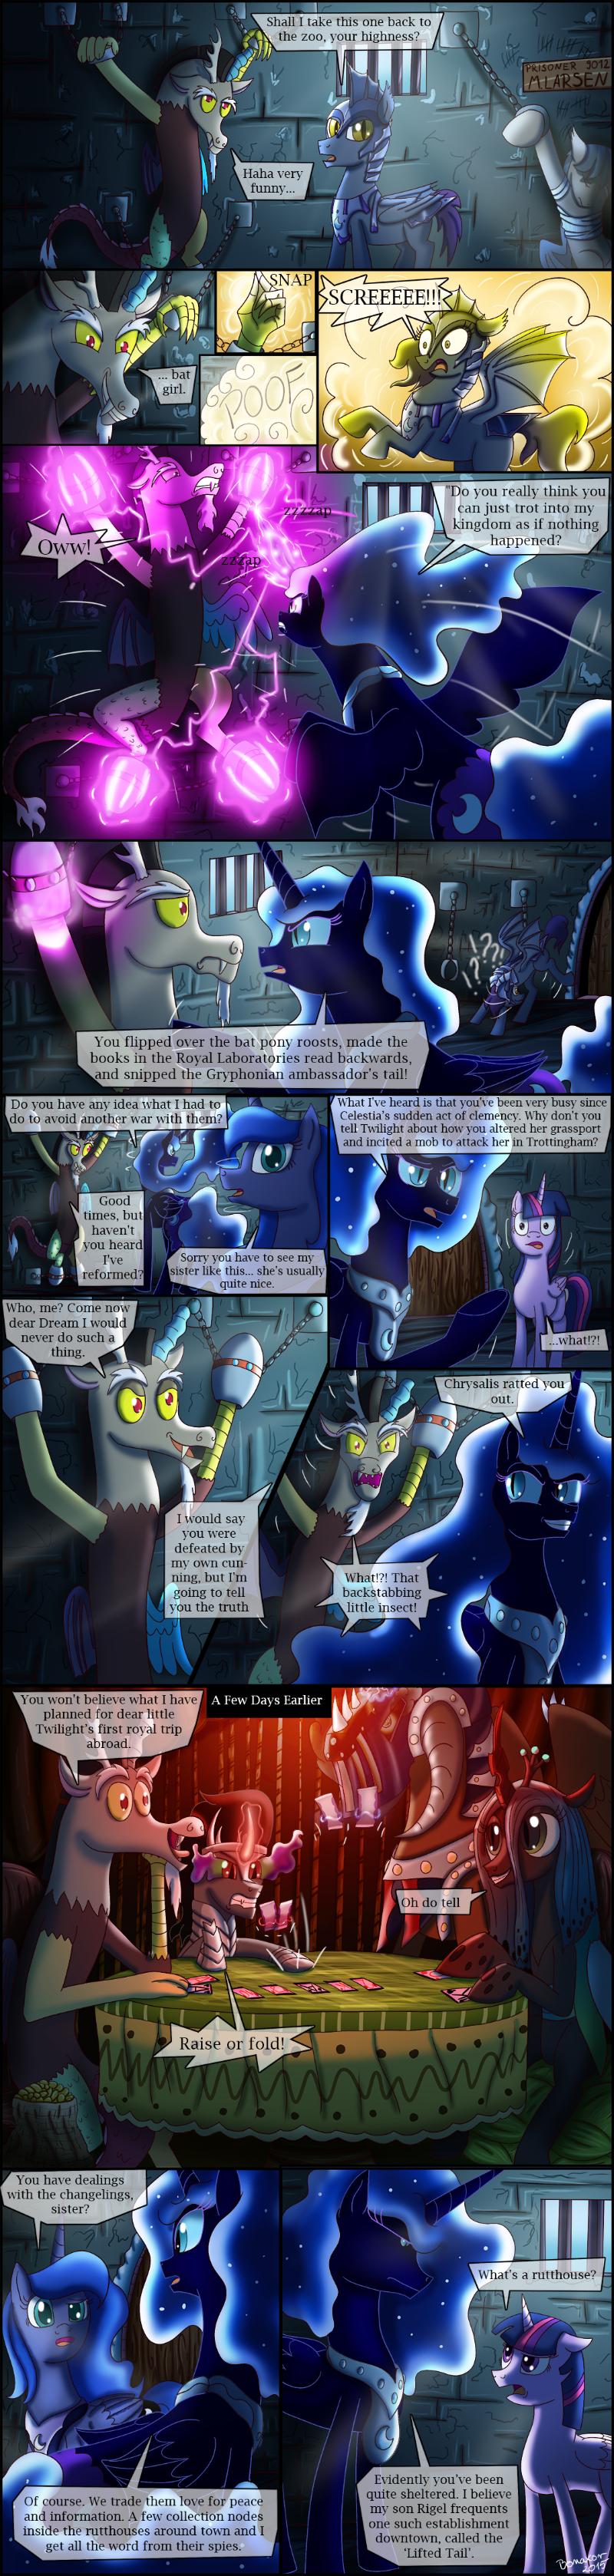 Page 6 - Malice in the Everpalace